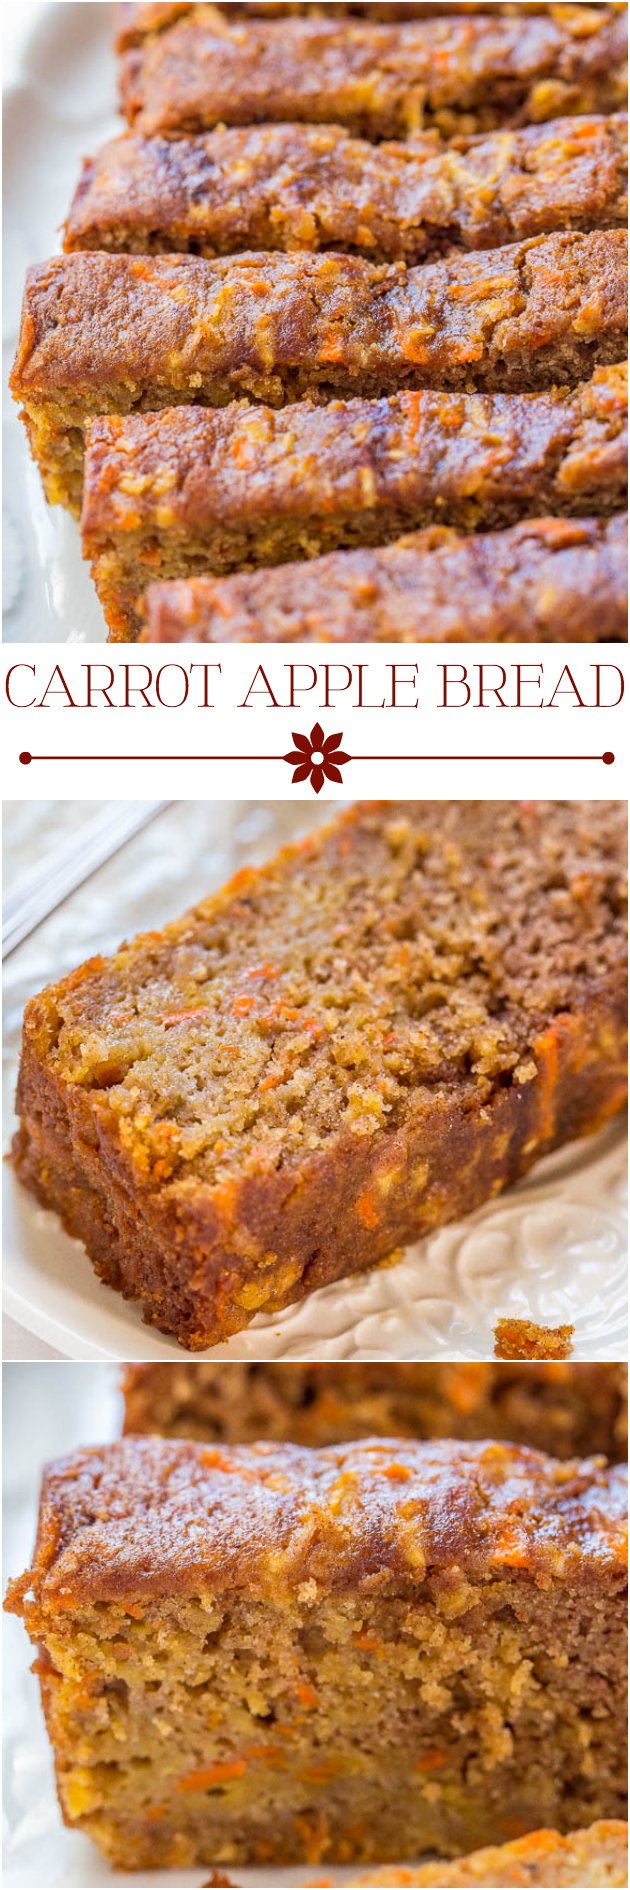 Carrot Apple Bread - Carrot cake with apples added and baked as a bread so it's healthier! Super moist, packed with flavor, fast and easy!!